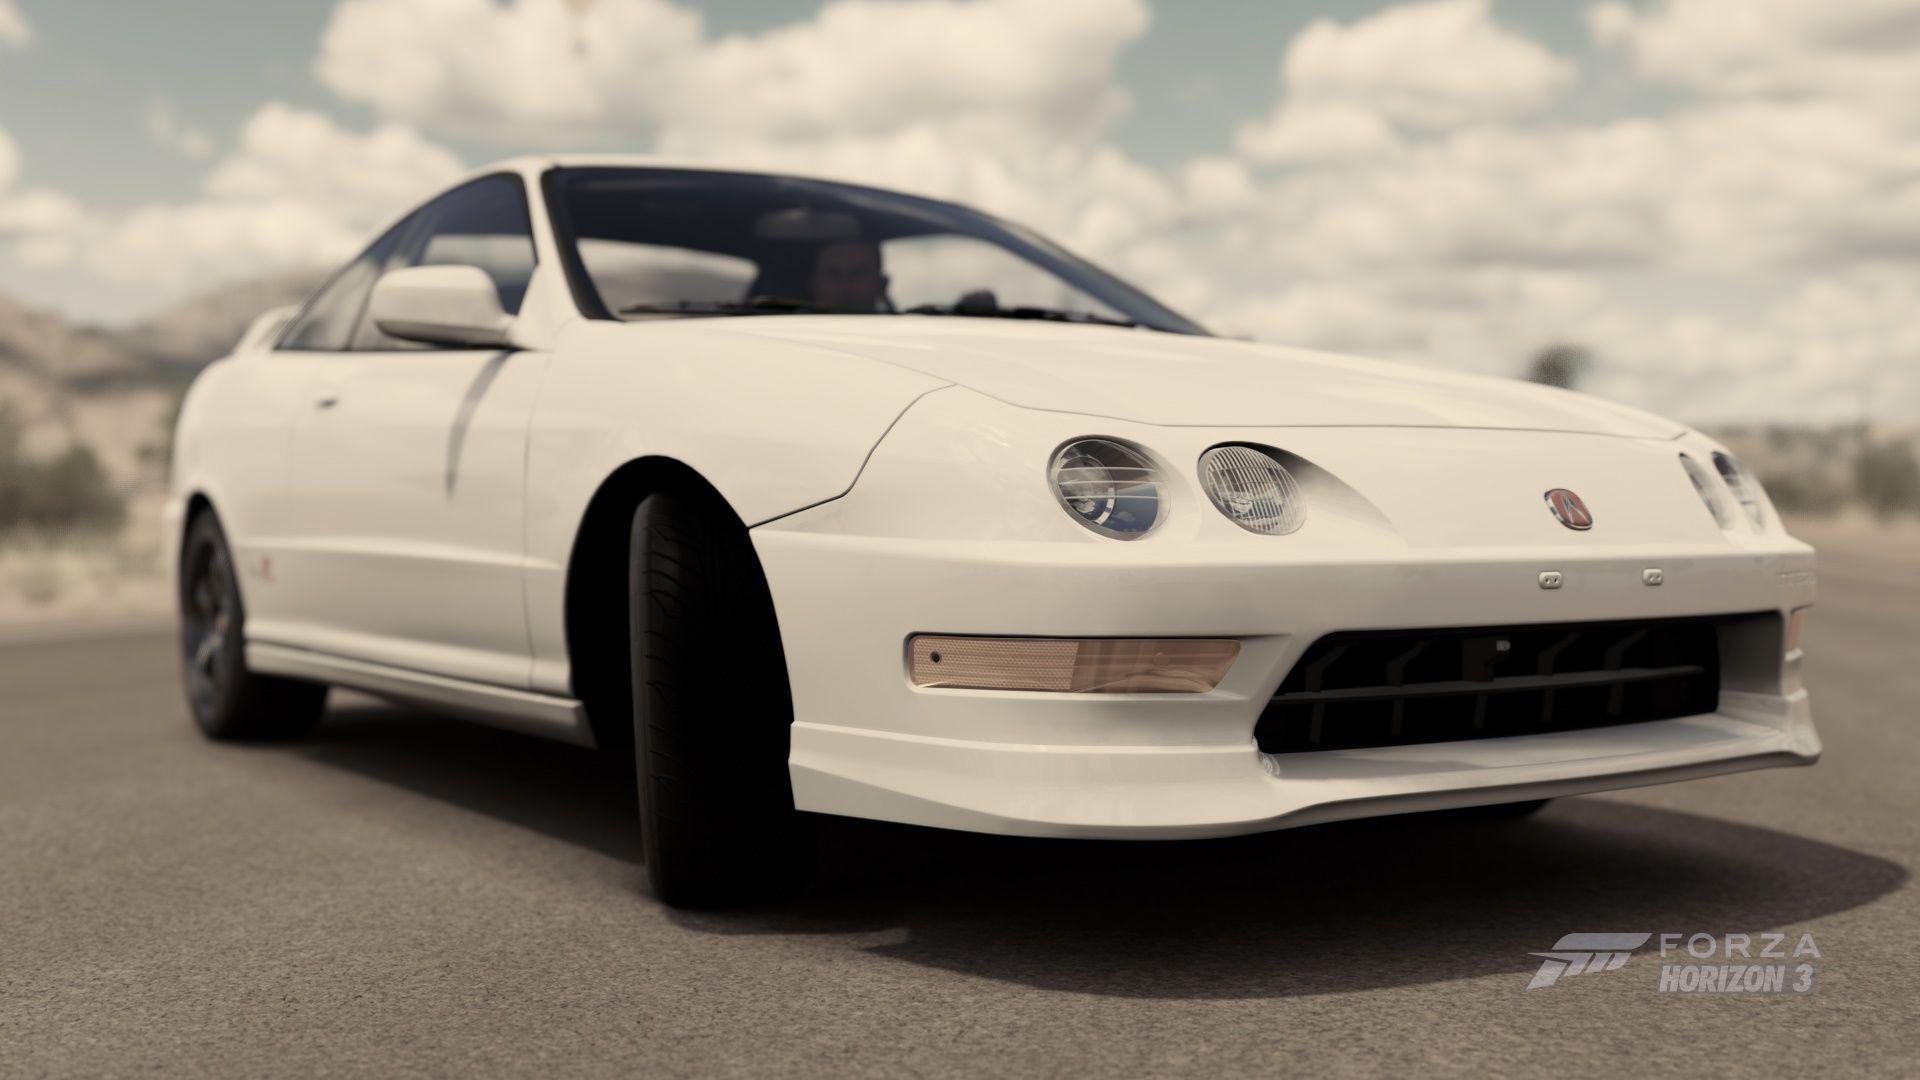 One of the coolest FWD cars, Acura Integra Type R : forza